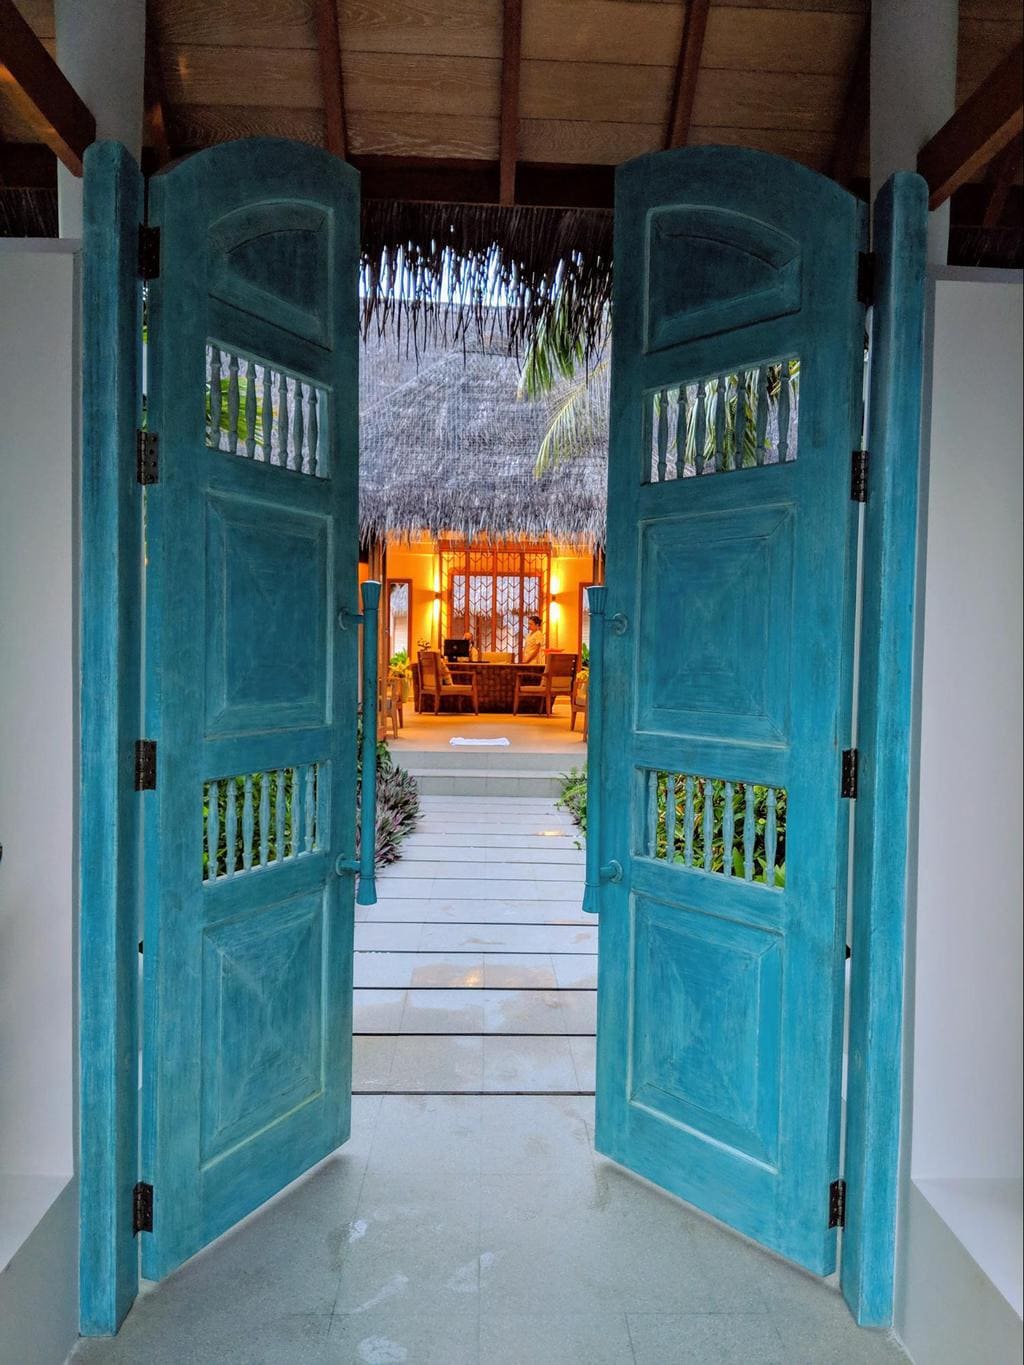 The entrance of Serenity Spa